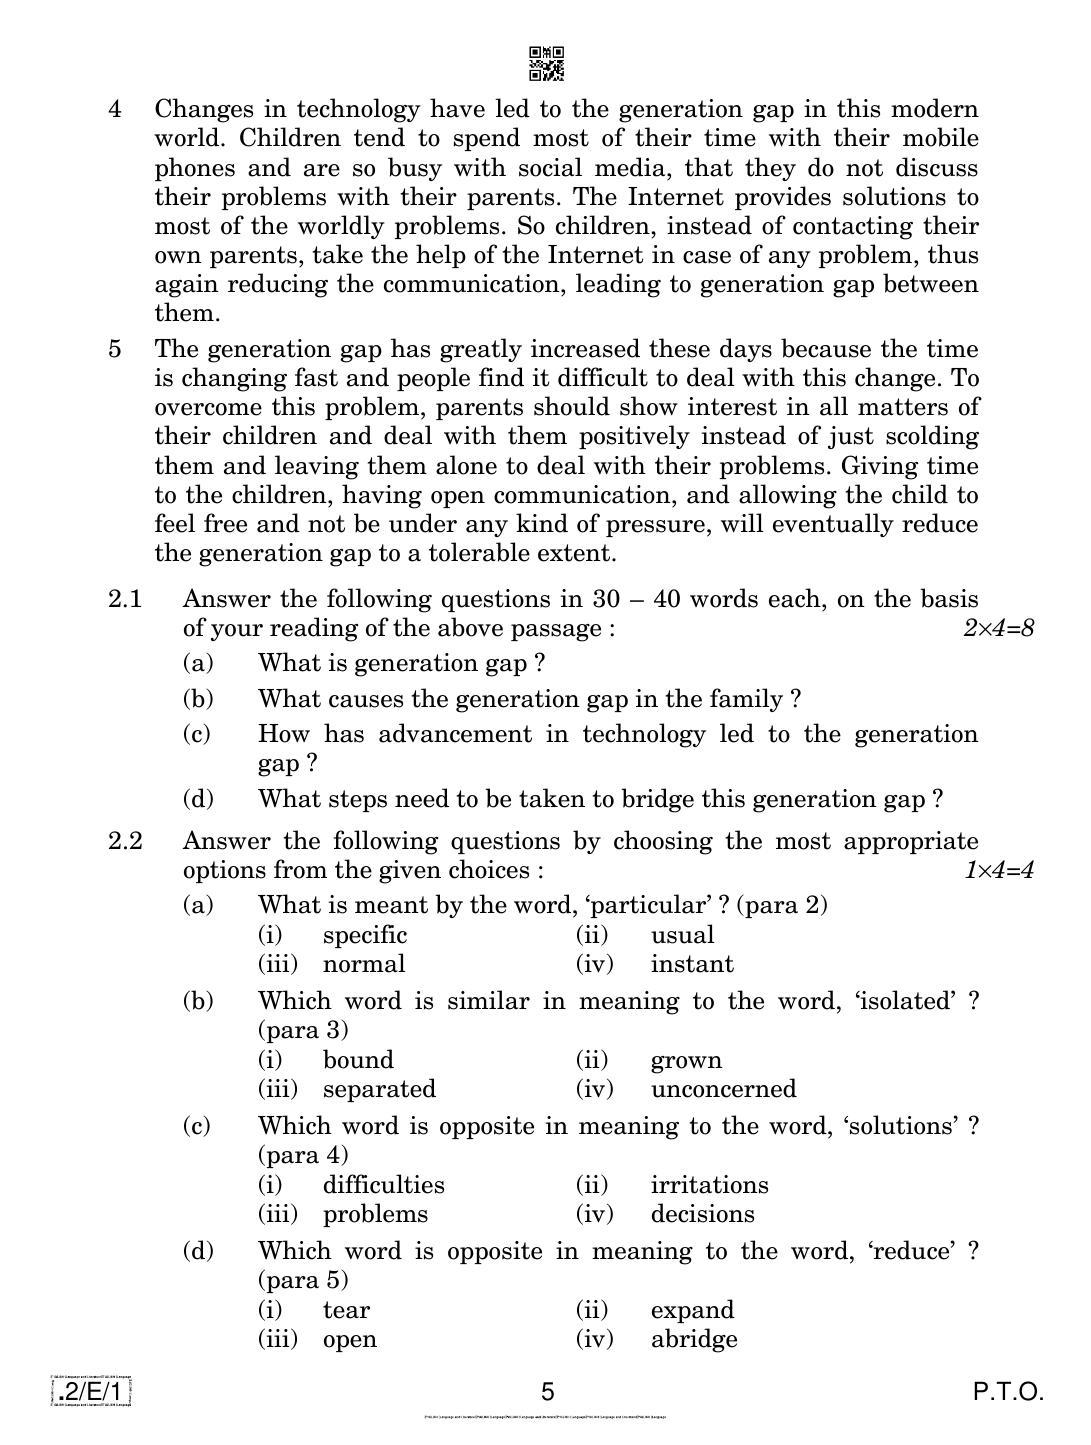 CBSE Class 10 2-C-1 Eng Lang. And Literature 2020 Compartment Question Paper - Page 5